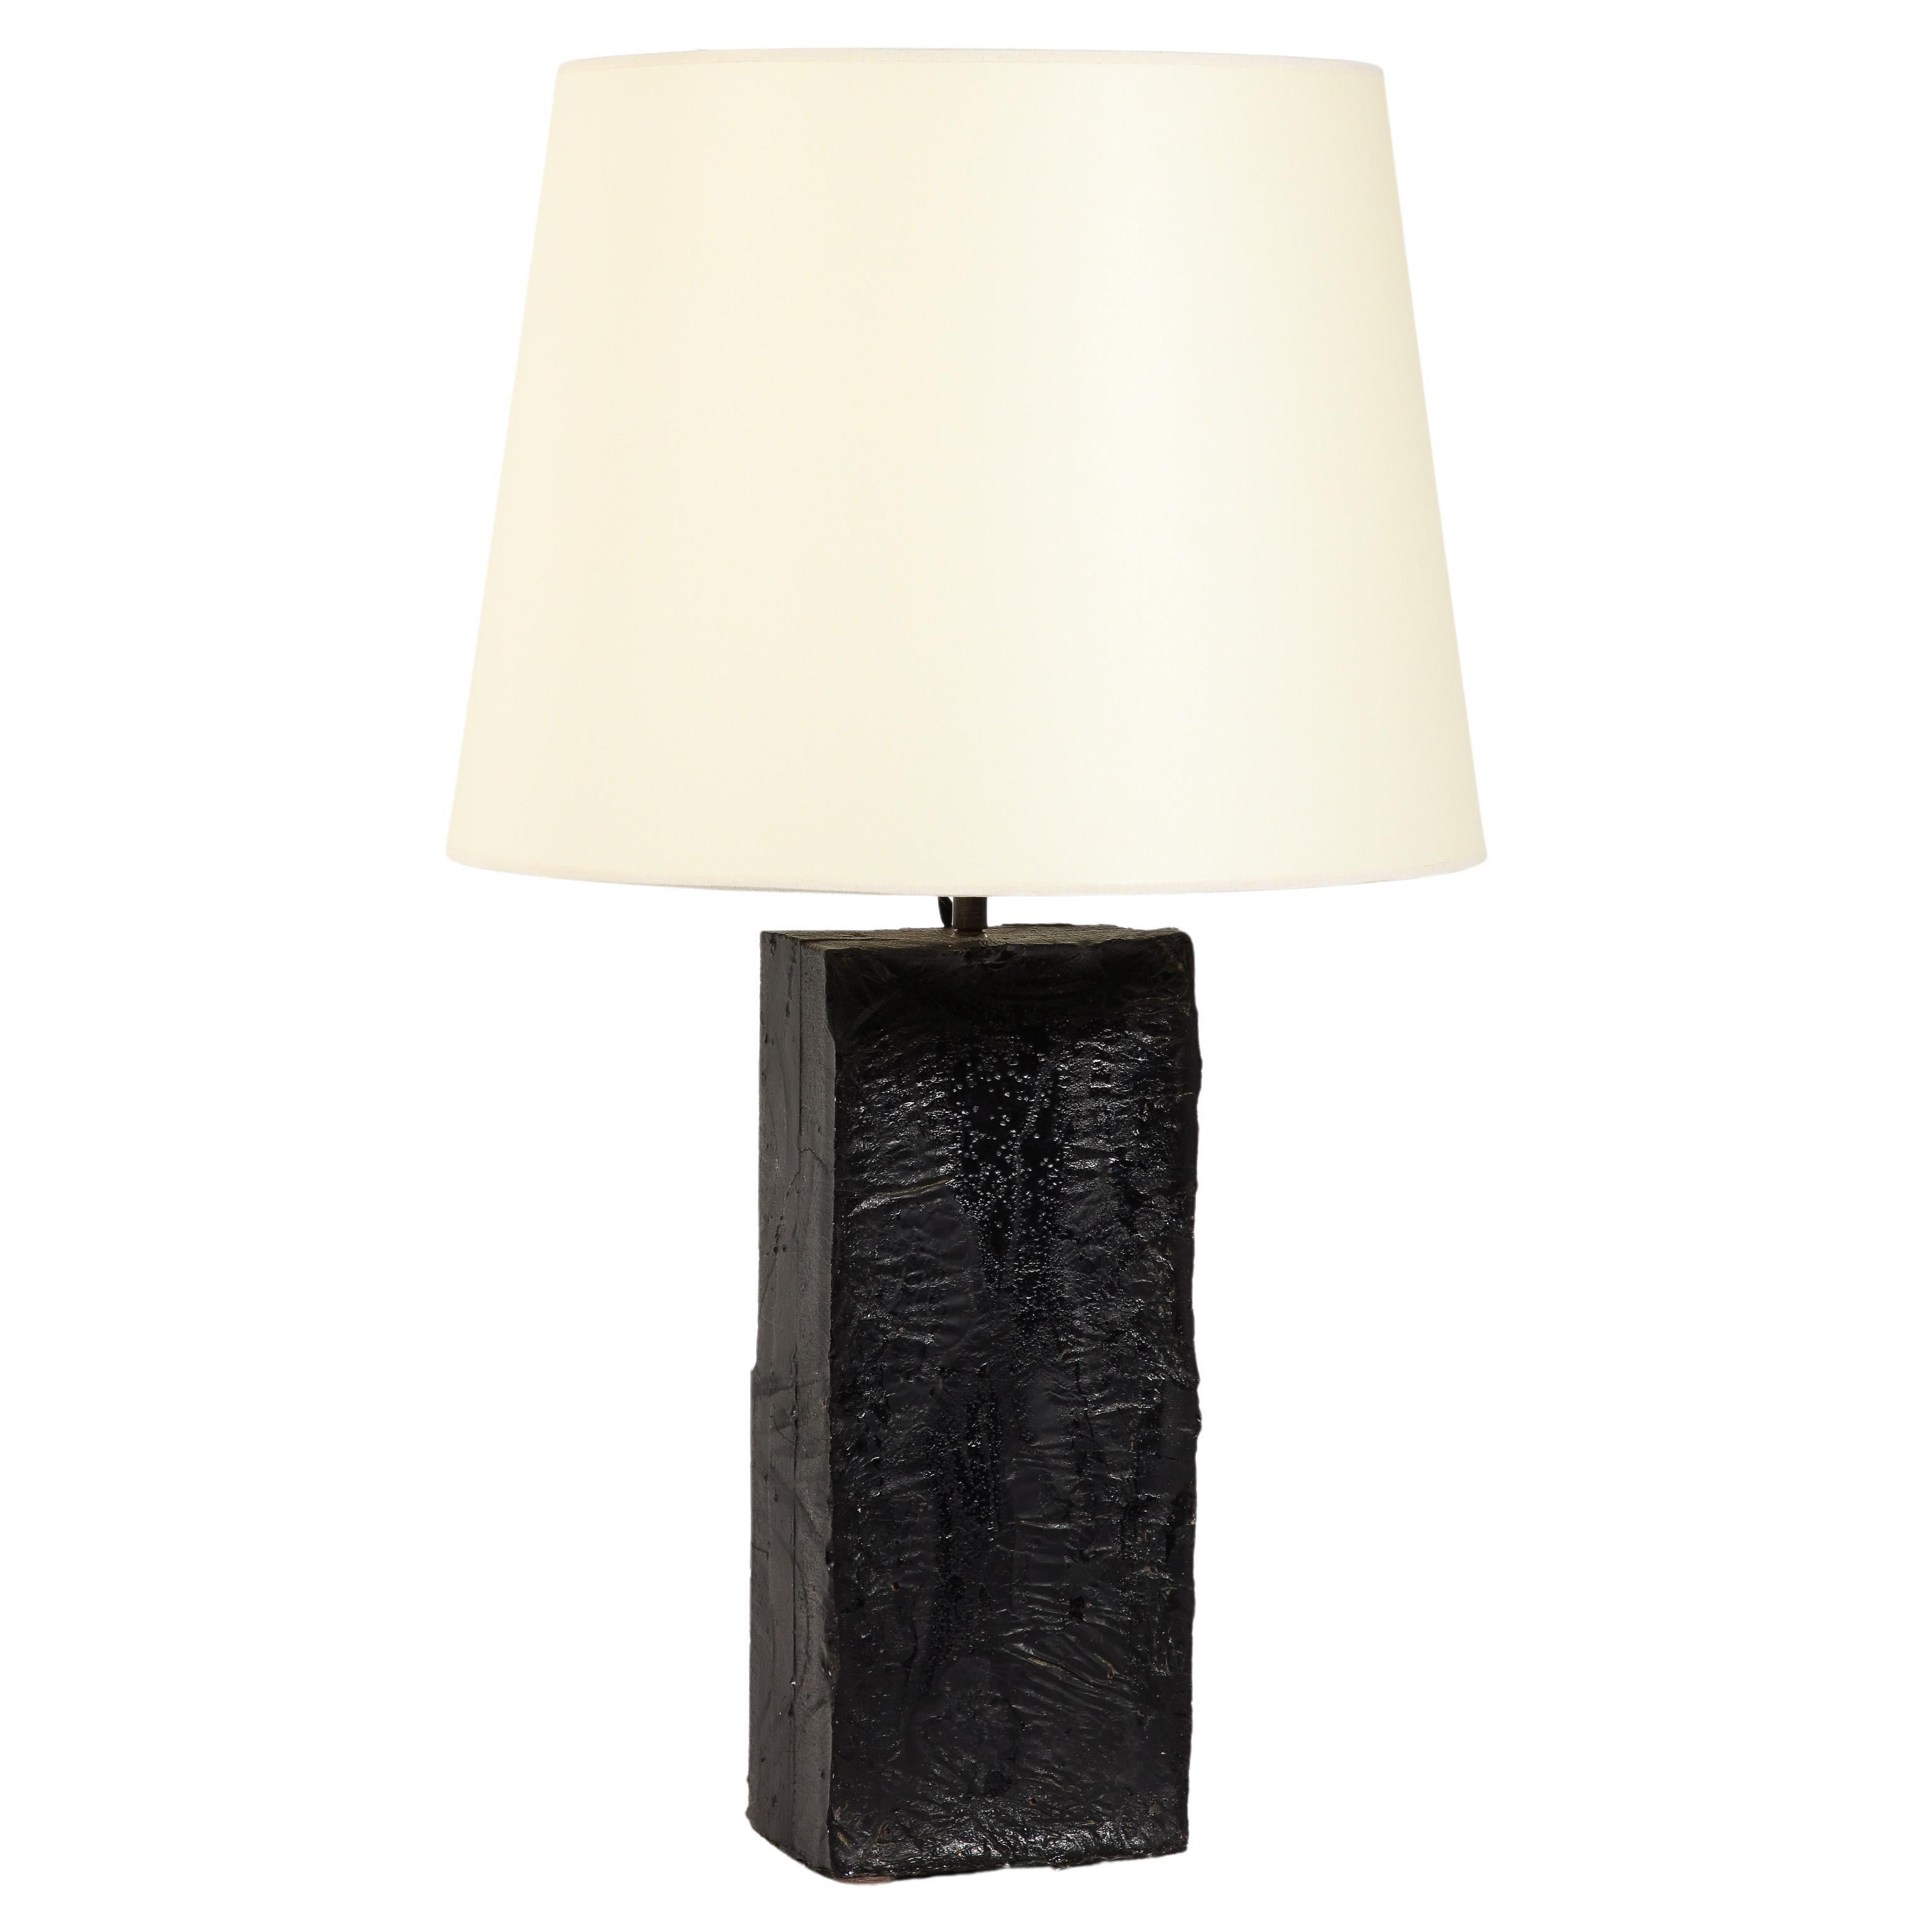 Black Cast Glass Table Lamp, USA 1960's For Sale